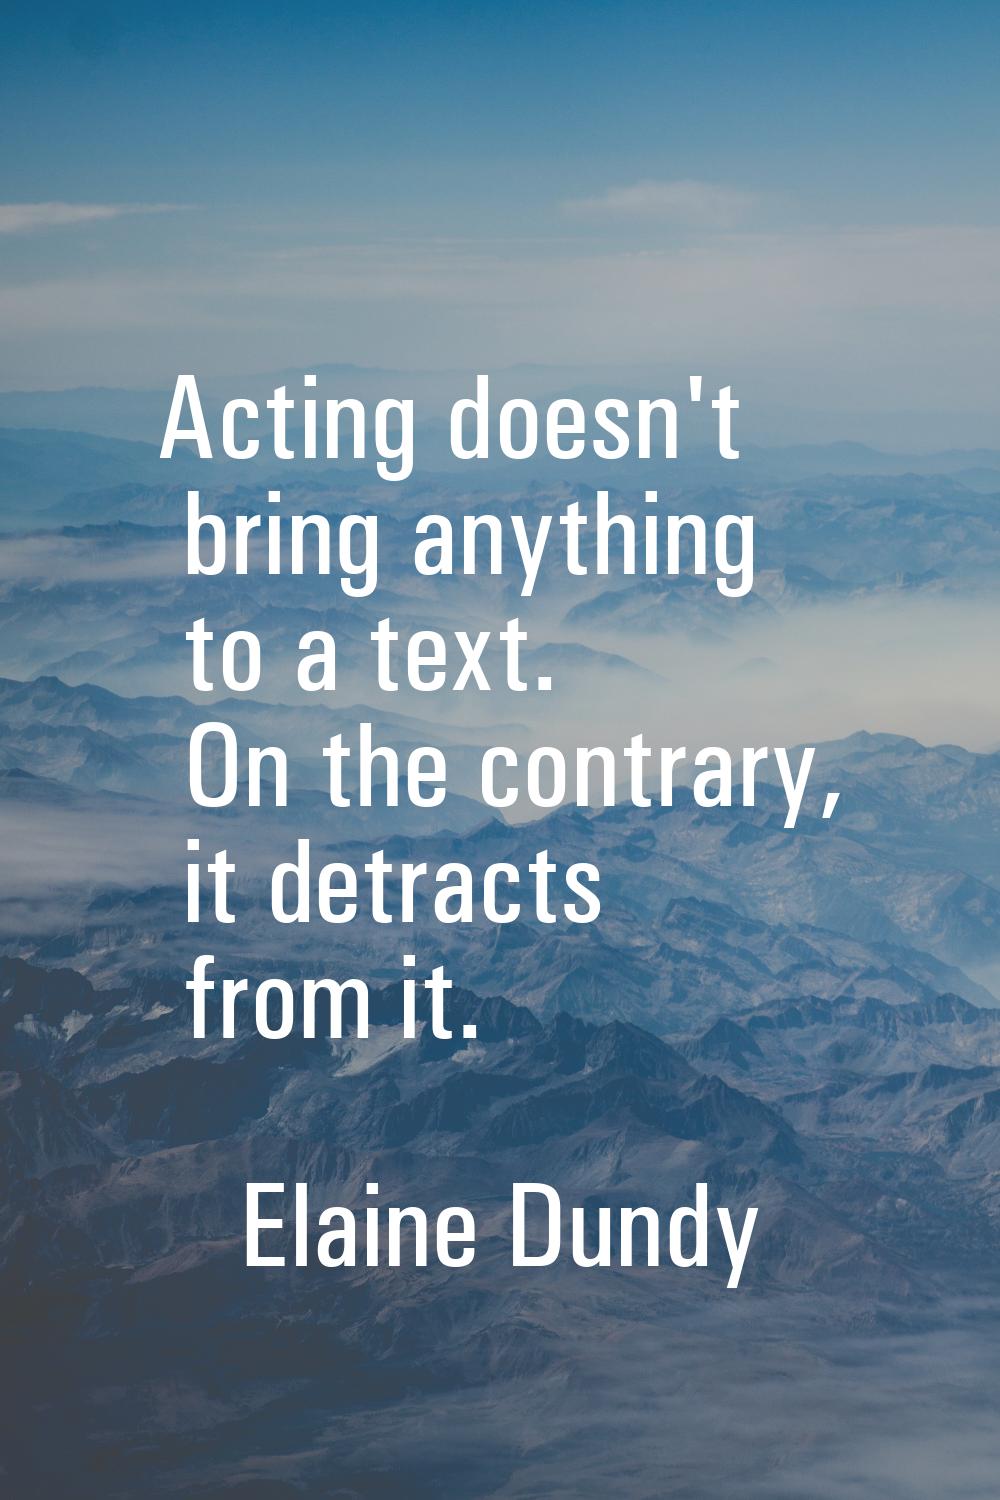 Acting doesn't bring anything to a text. On the contrary, it detracts from it.